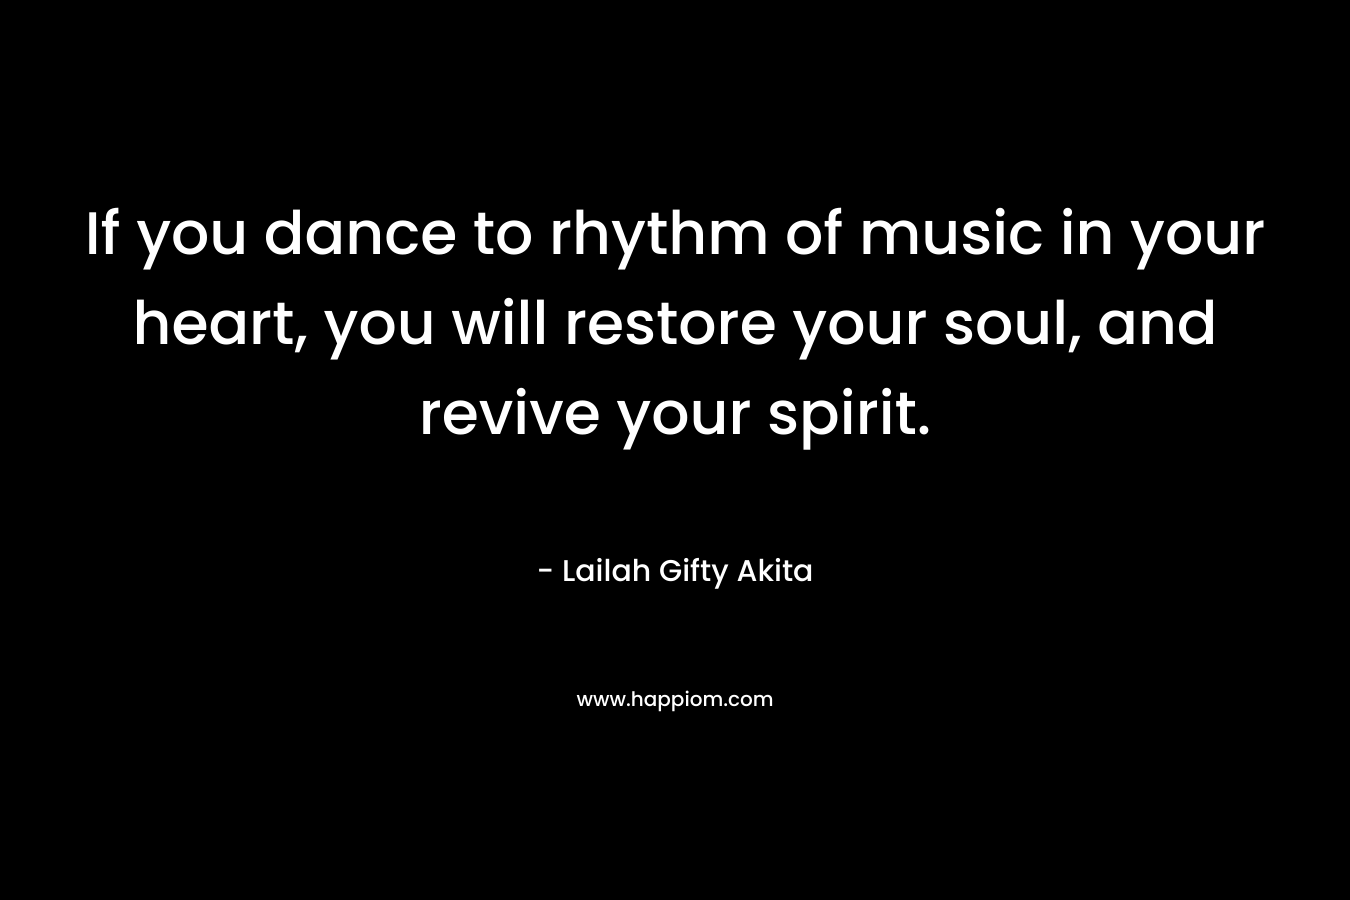 If you dance to rhythm of music in your heart, you will restore your soul, and revive your spirit.